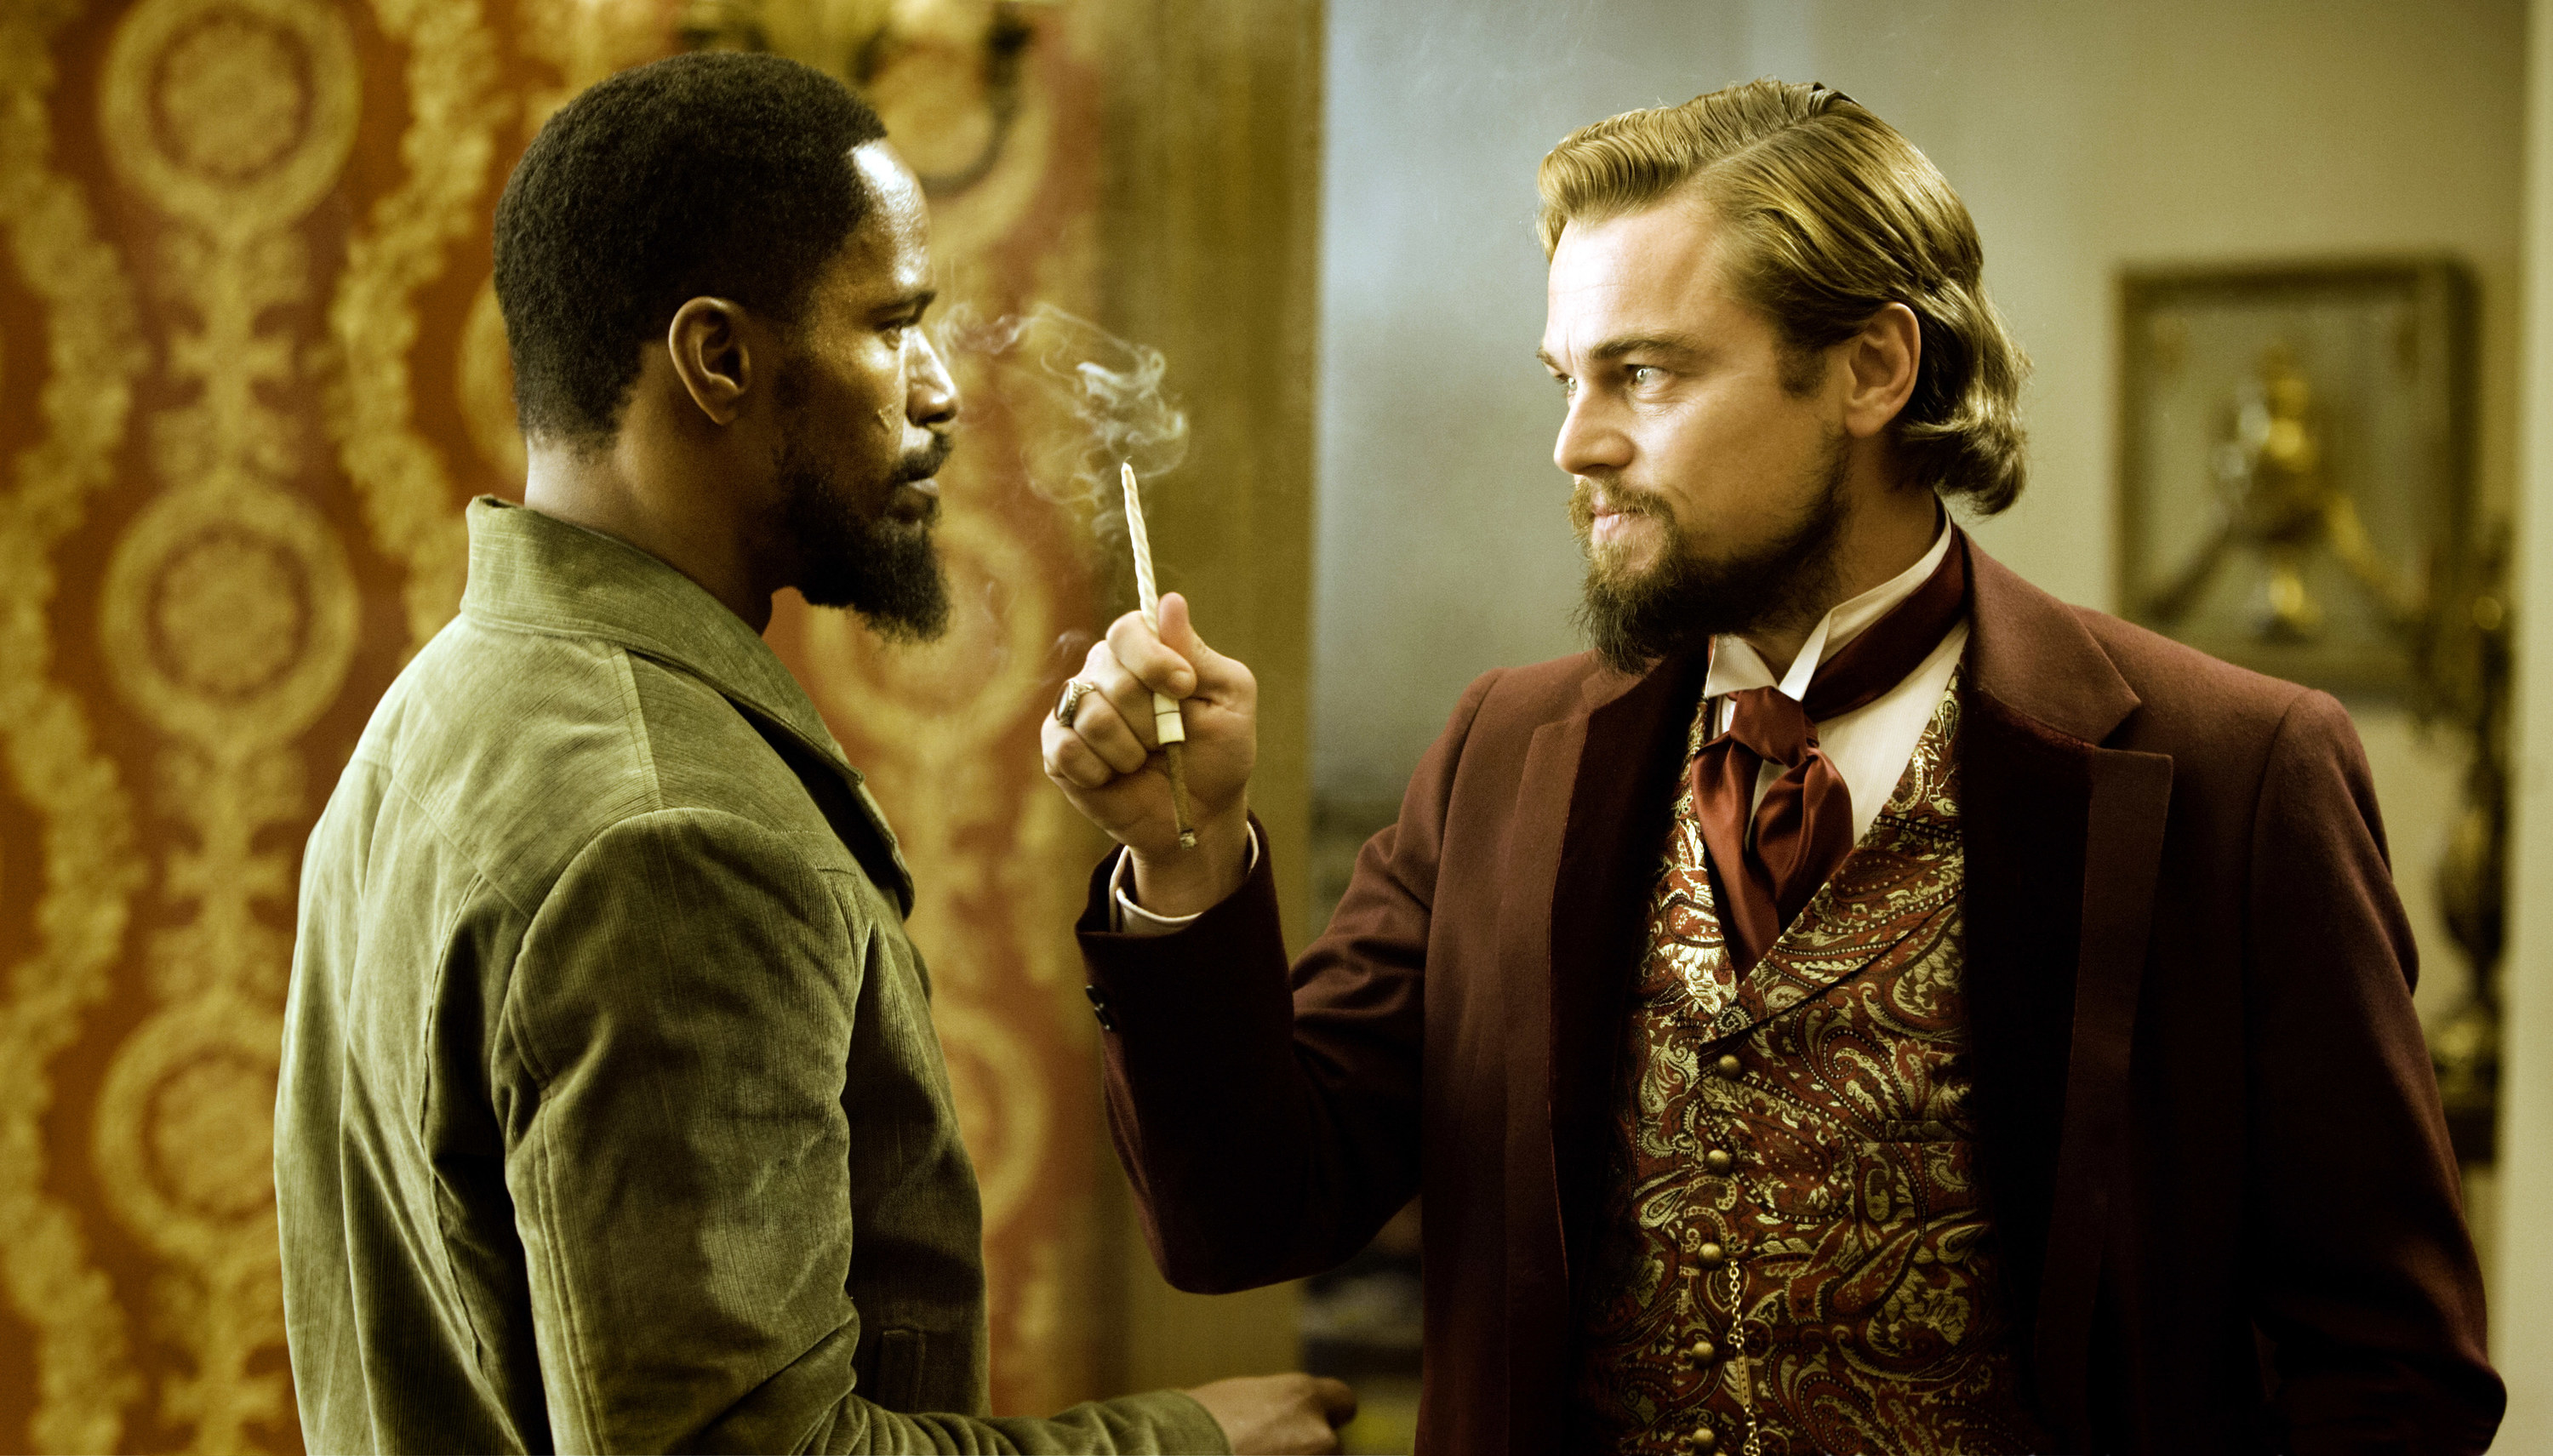 Jamie Foxx and Leonardo DiCaprio face off while in character